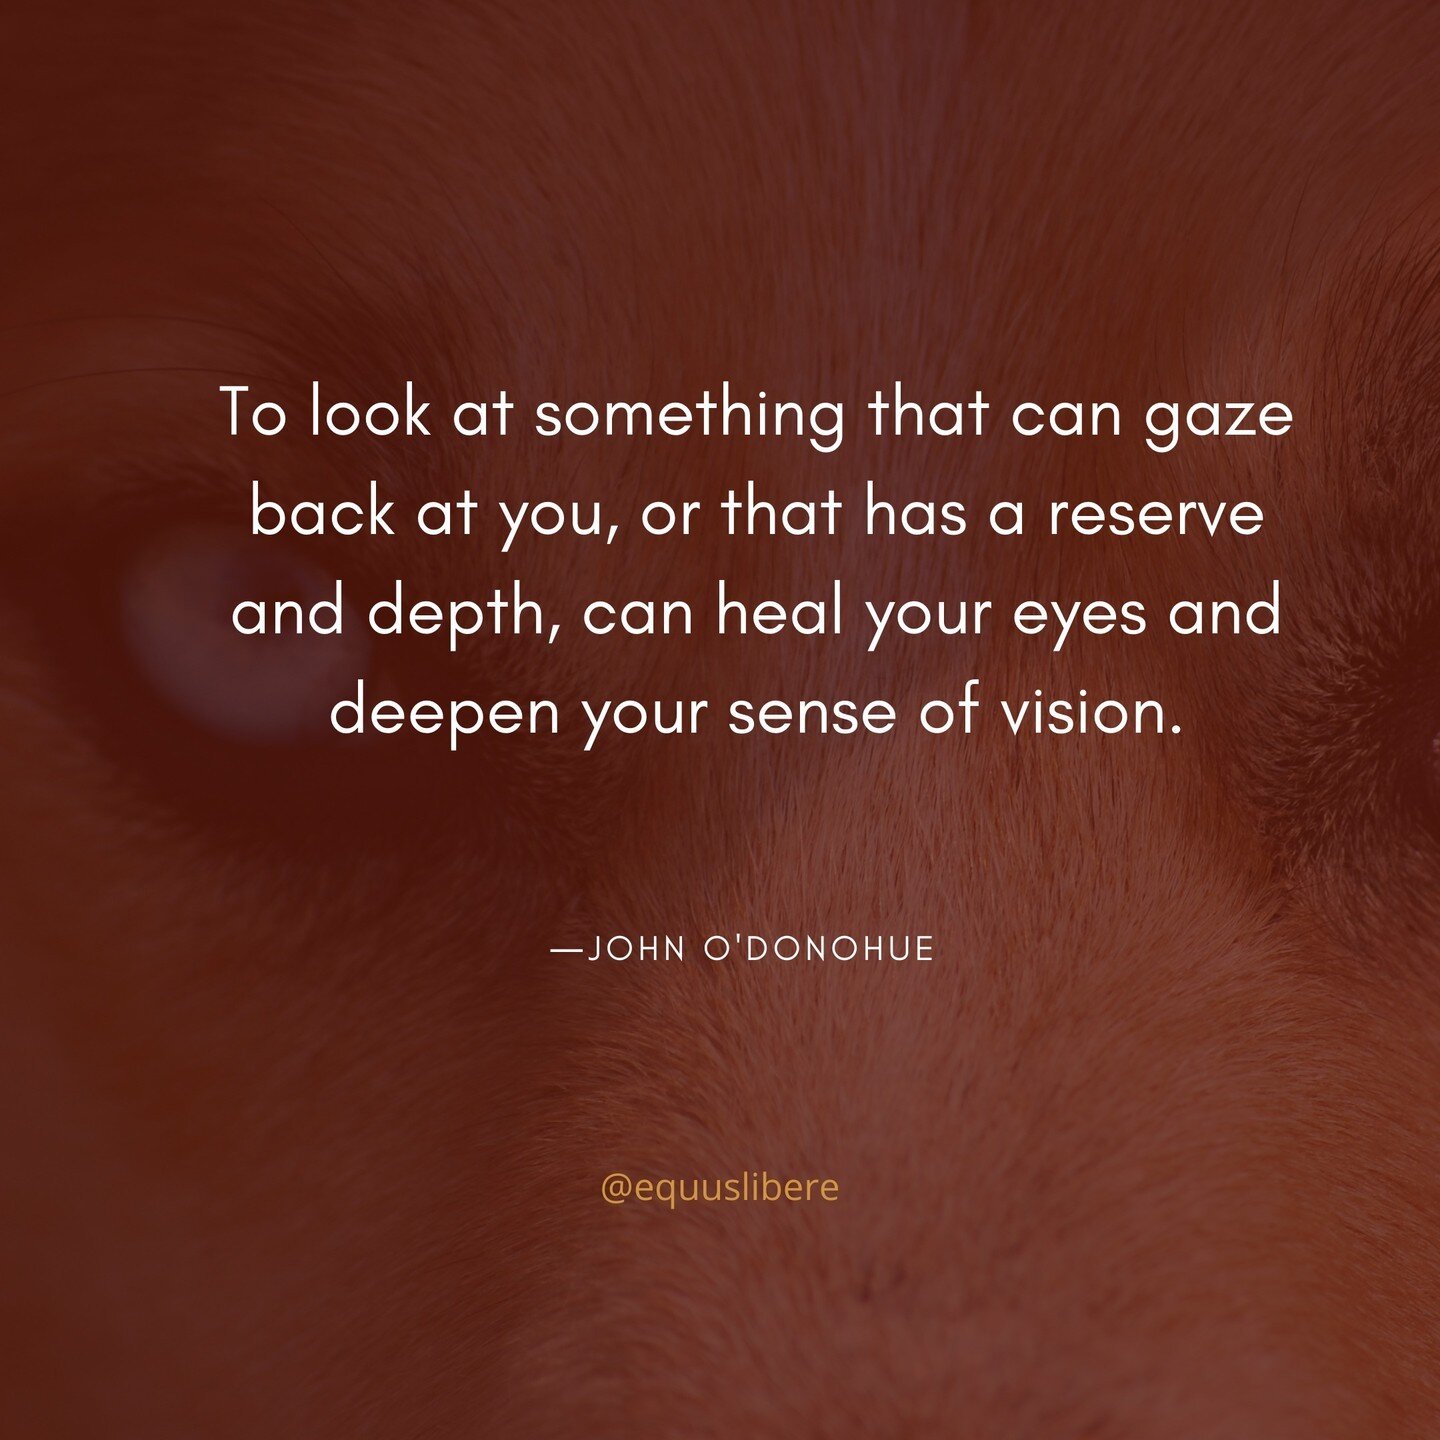 To look at something that can gaze back at you, or that has a reserve and depth, can heal your eyes and deepen your sense of vision.⠀
-John O'Donohue⠀
.⠀
.⠀
.⠀
#quotesoftheday #selfmotivation #inspirationalquotes #quotesdaily #inspired #somatics #wan